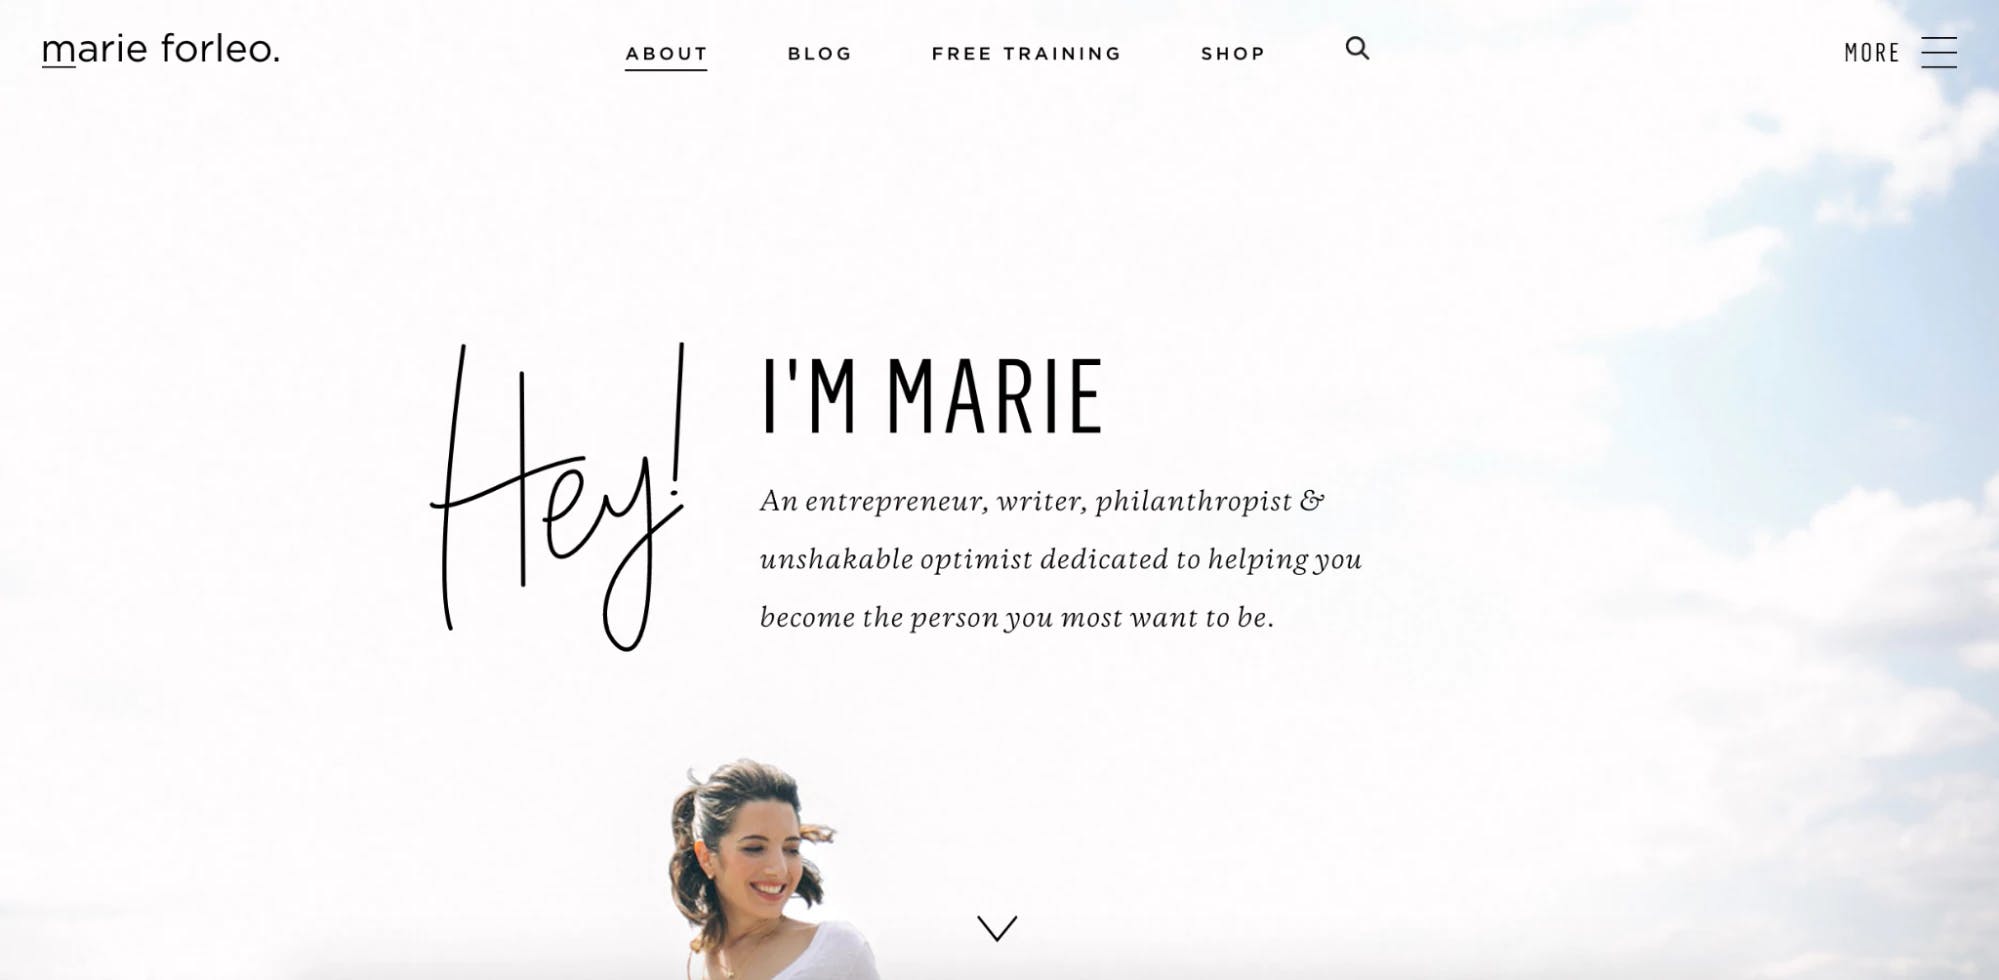 marie-forelo-about-page.webp